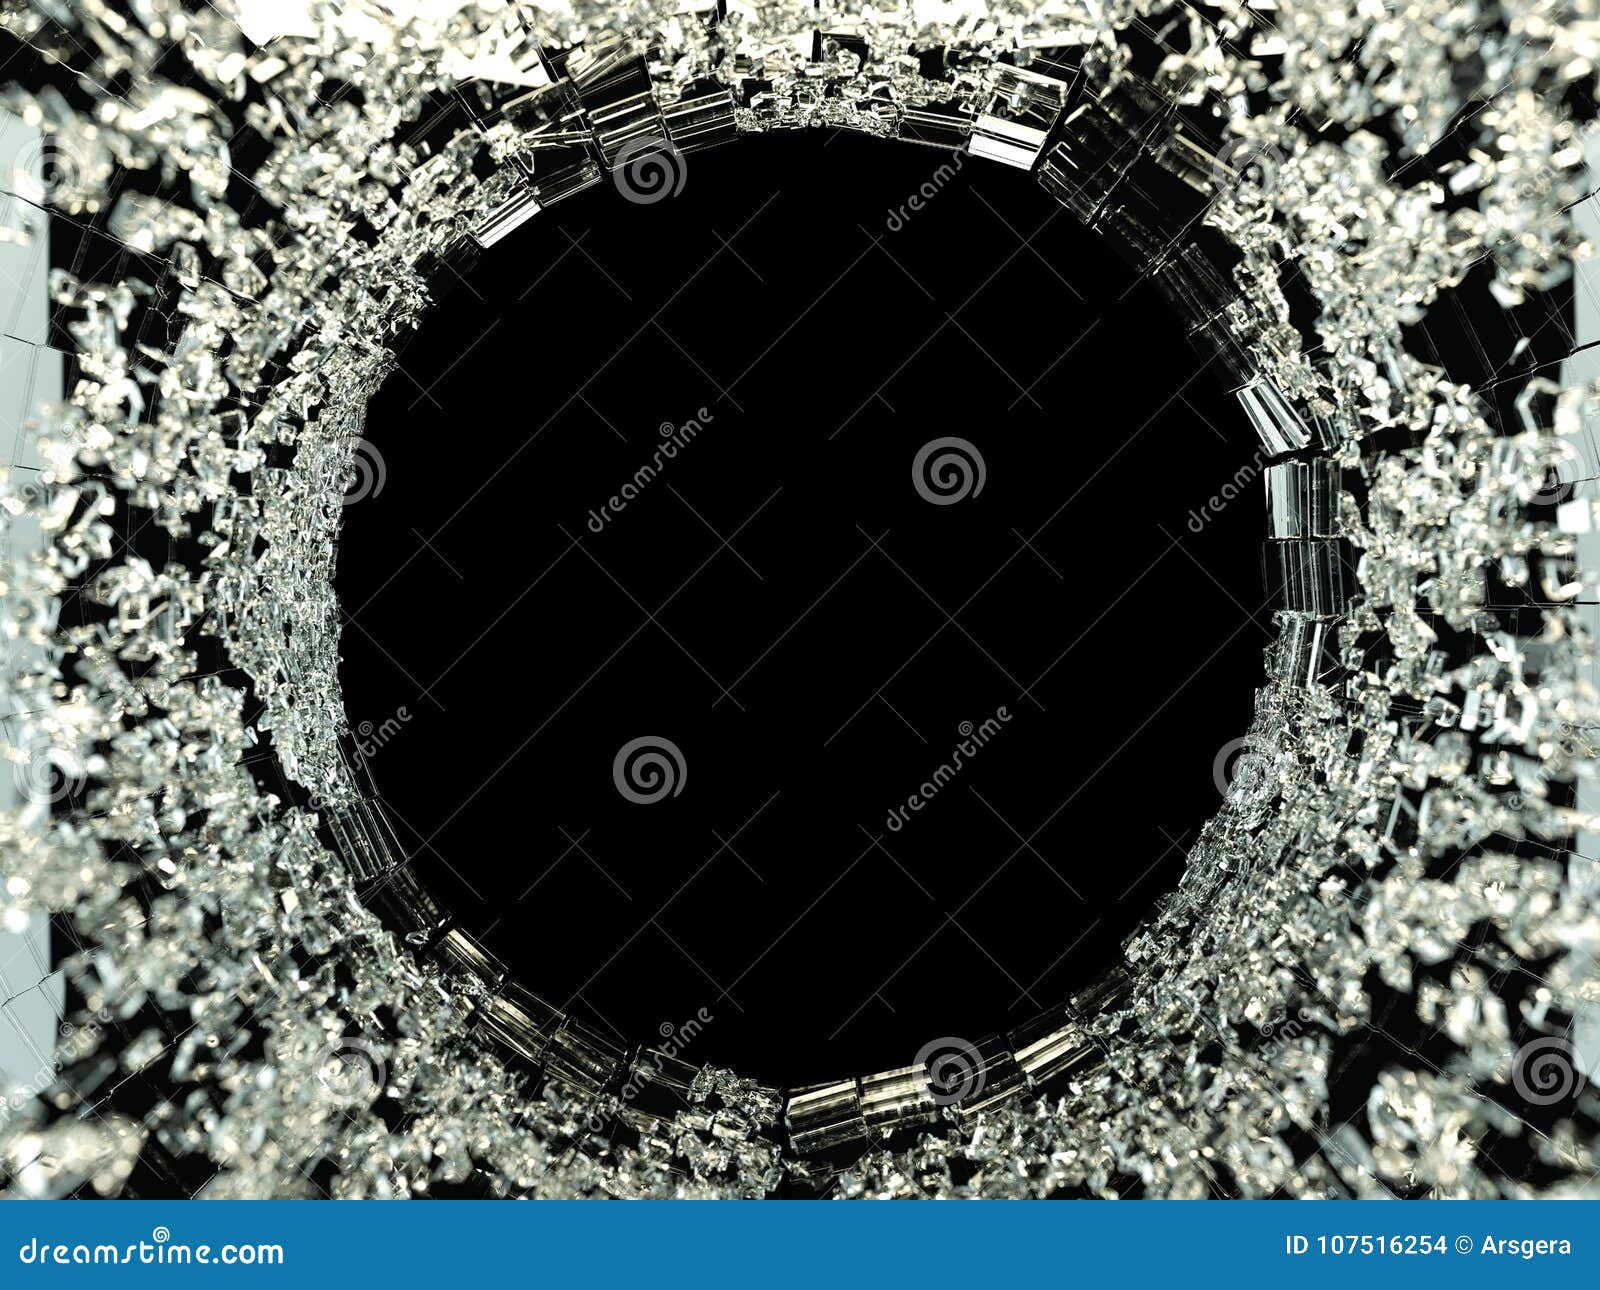 Broken and Shattered Glass Pane Stock Image - Image of crime